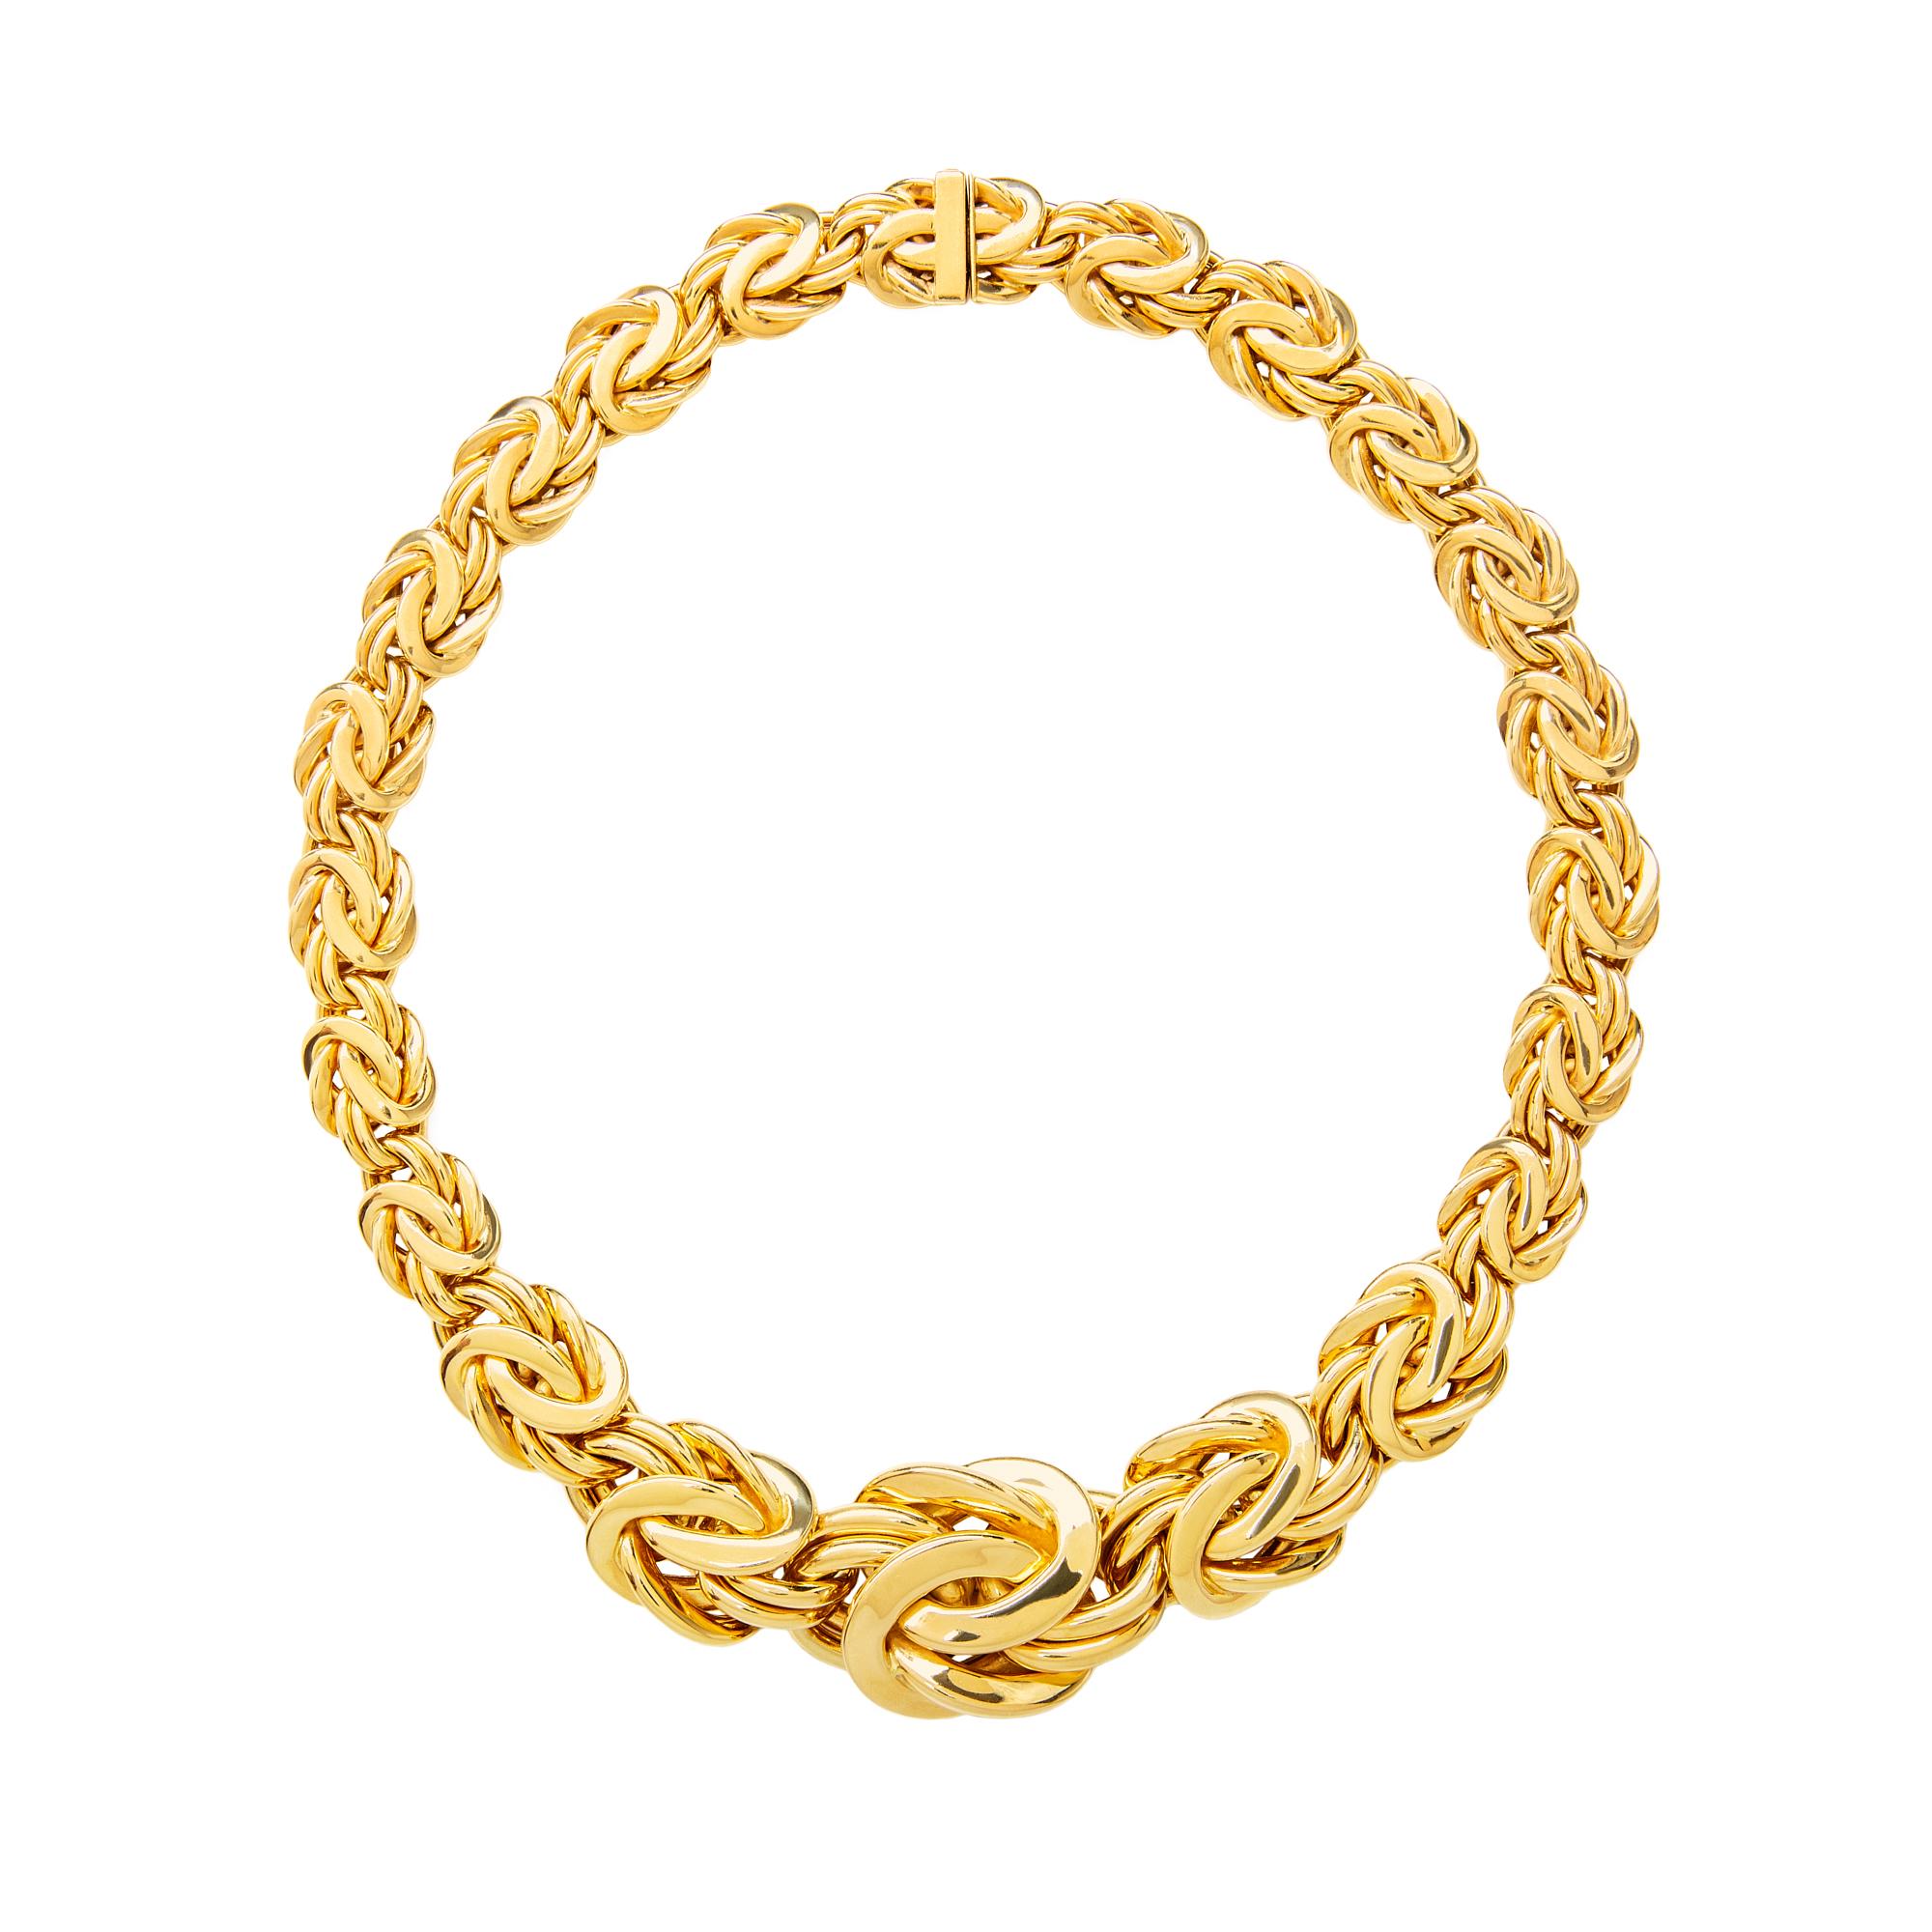 Linkmanship extraordinaire!

Comprised of graduating 18k yellow gold links of interlocking design, this piece celebrates the craftsmanship of its Pforzheim-based maker founded in 1885, famous for their superb goldsmithing and aesthetic.

18-1/2